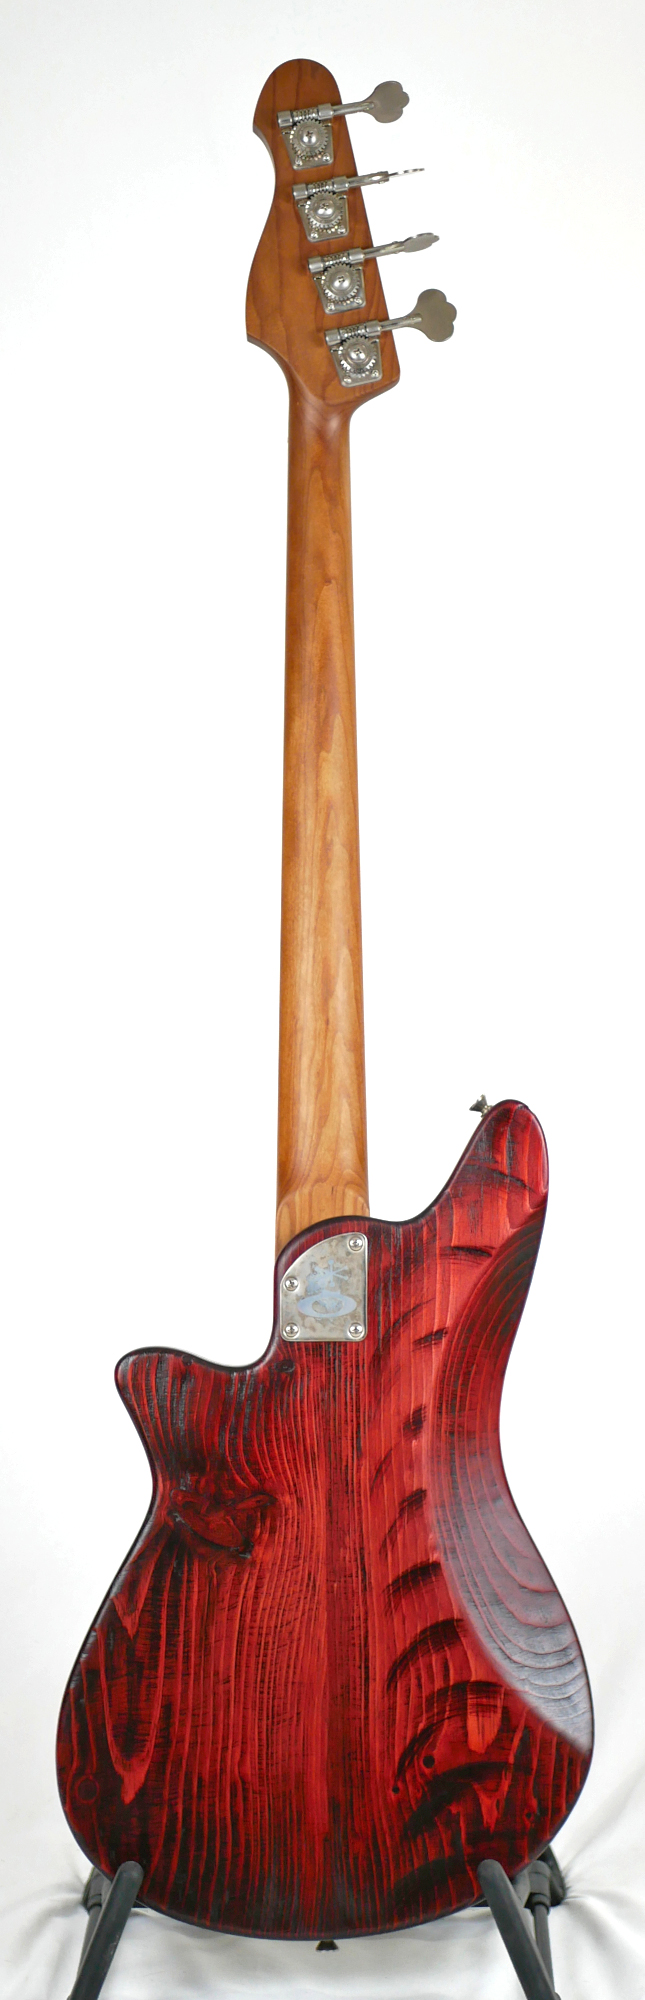 Marilyn MM 32" Medium-Scale Bass in Dark Cherry on Distressed Pine with EMG MMCS Pickup